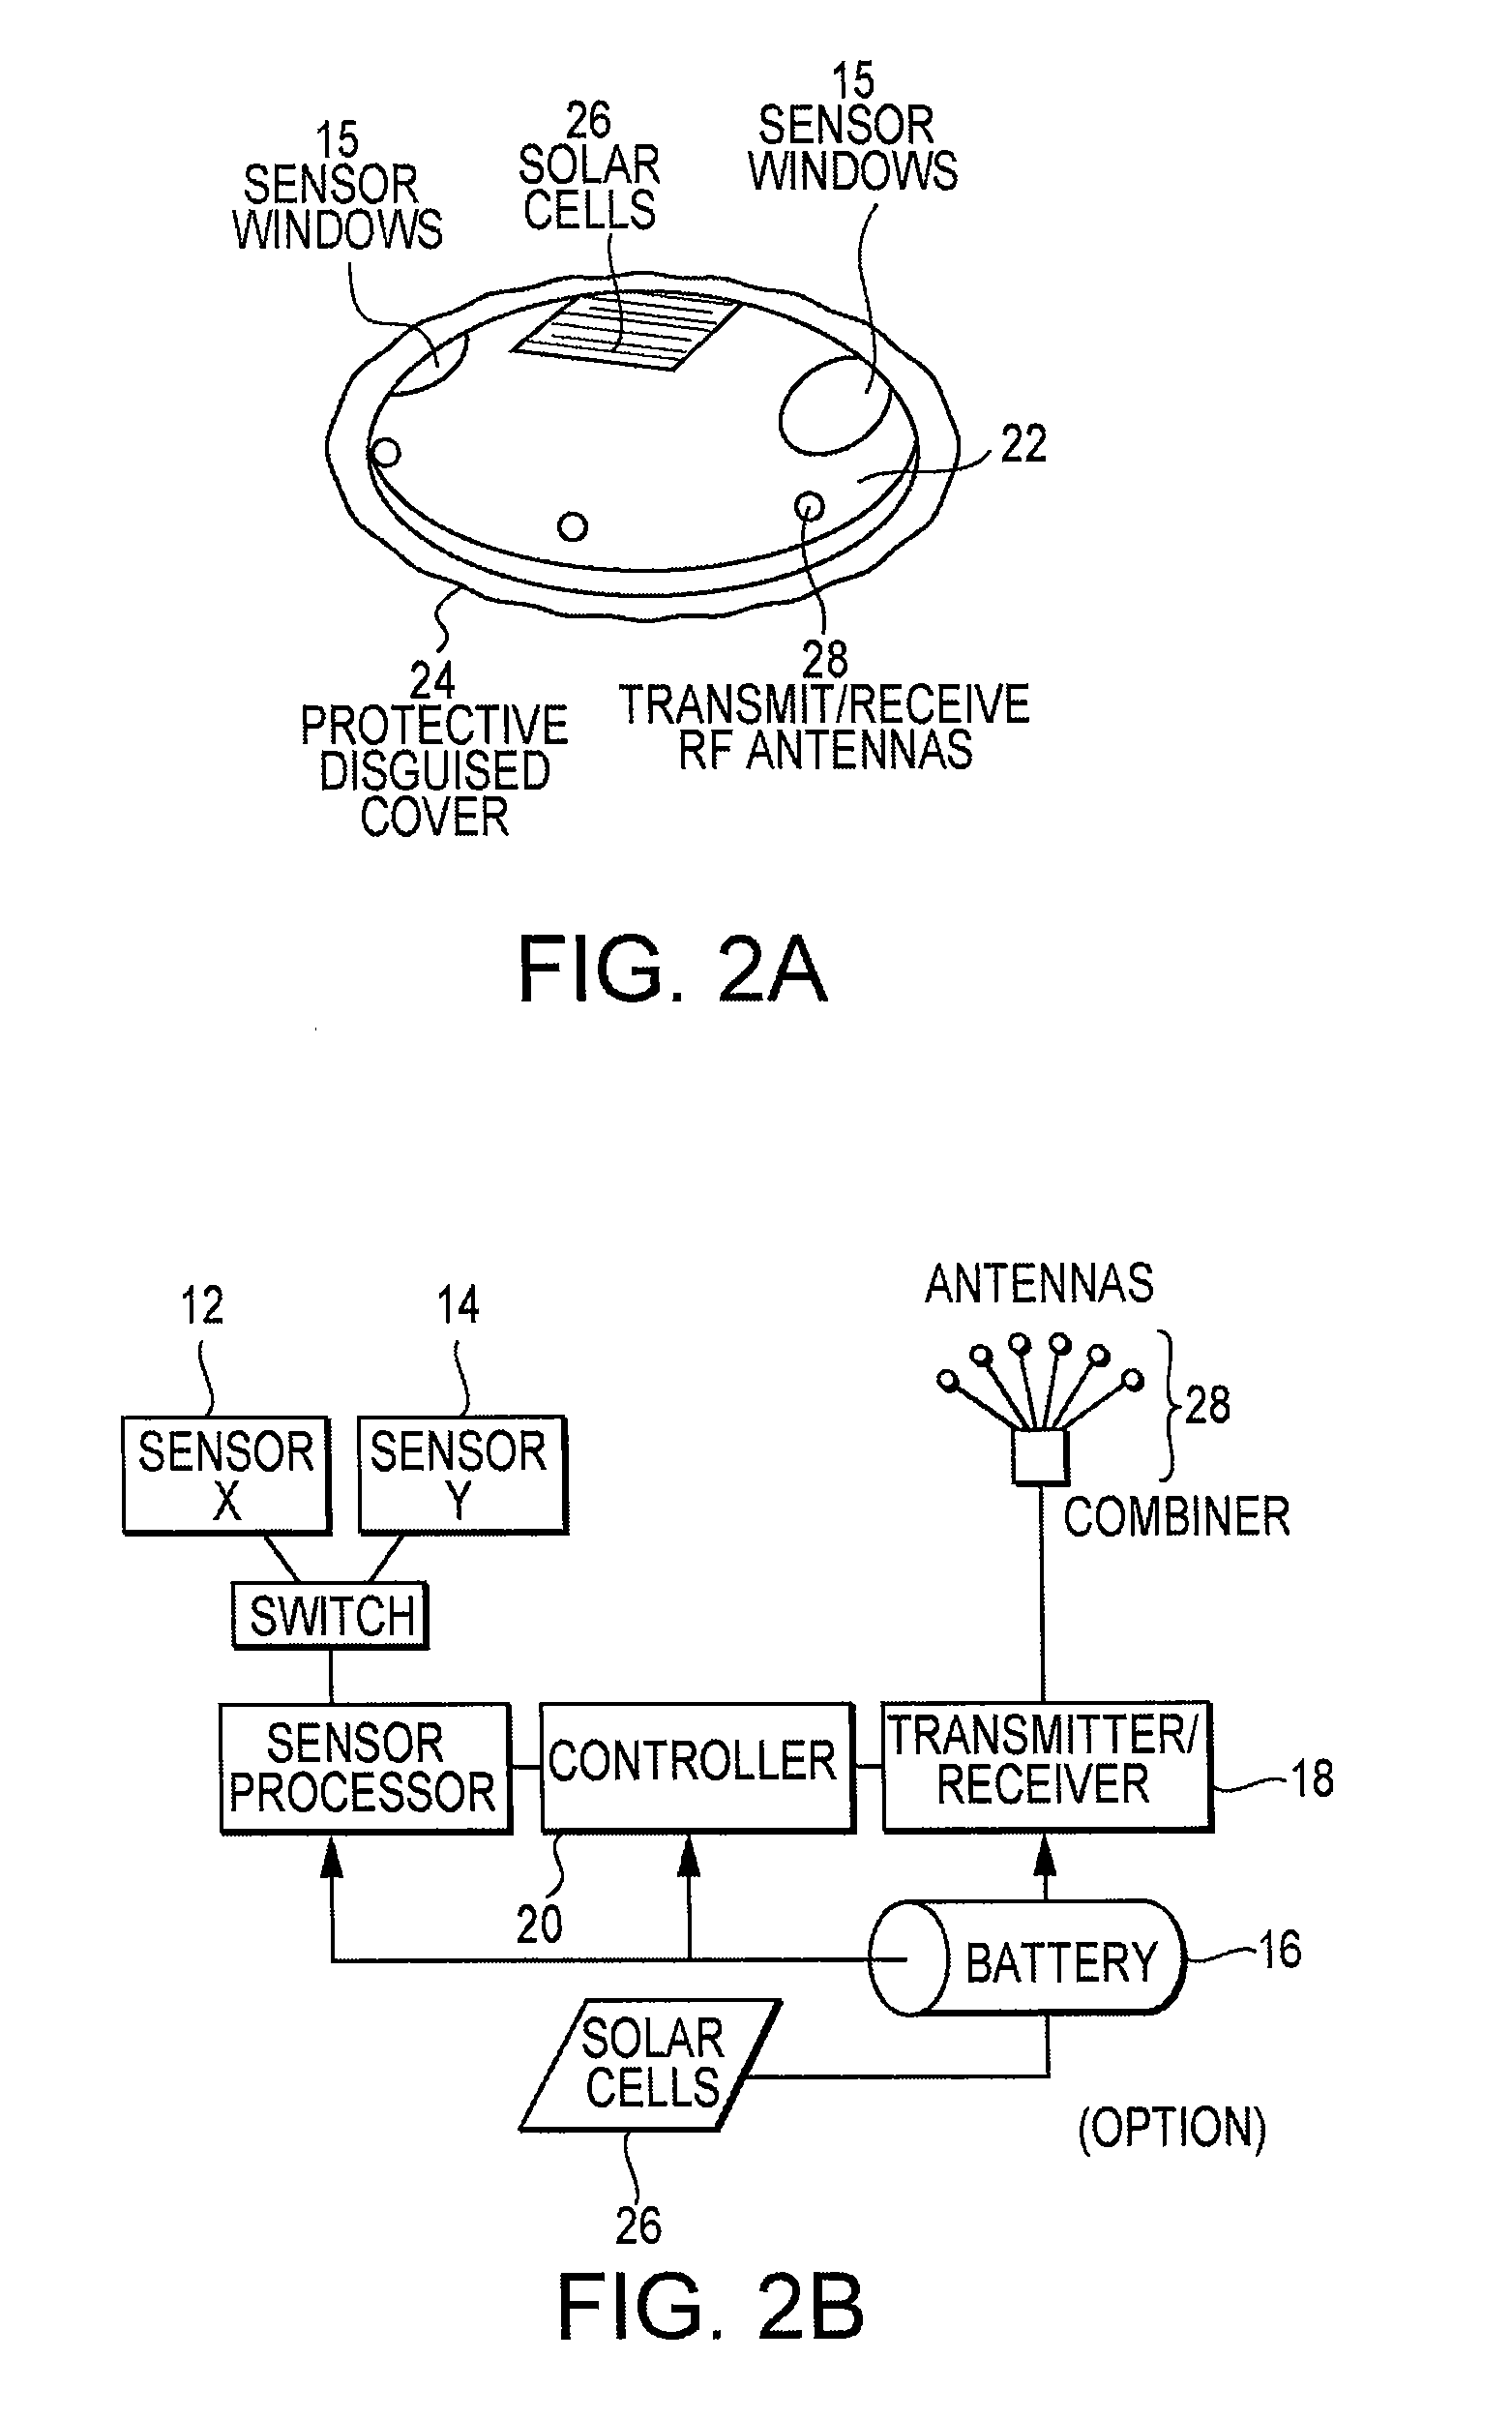 System and Methods for Monitoring Security Zones